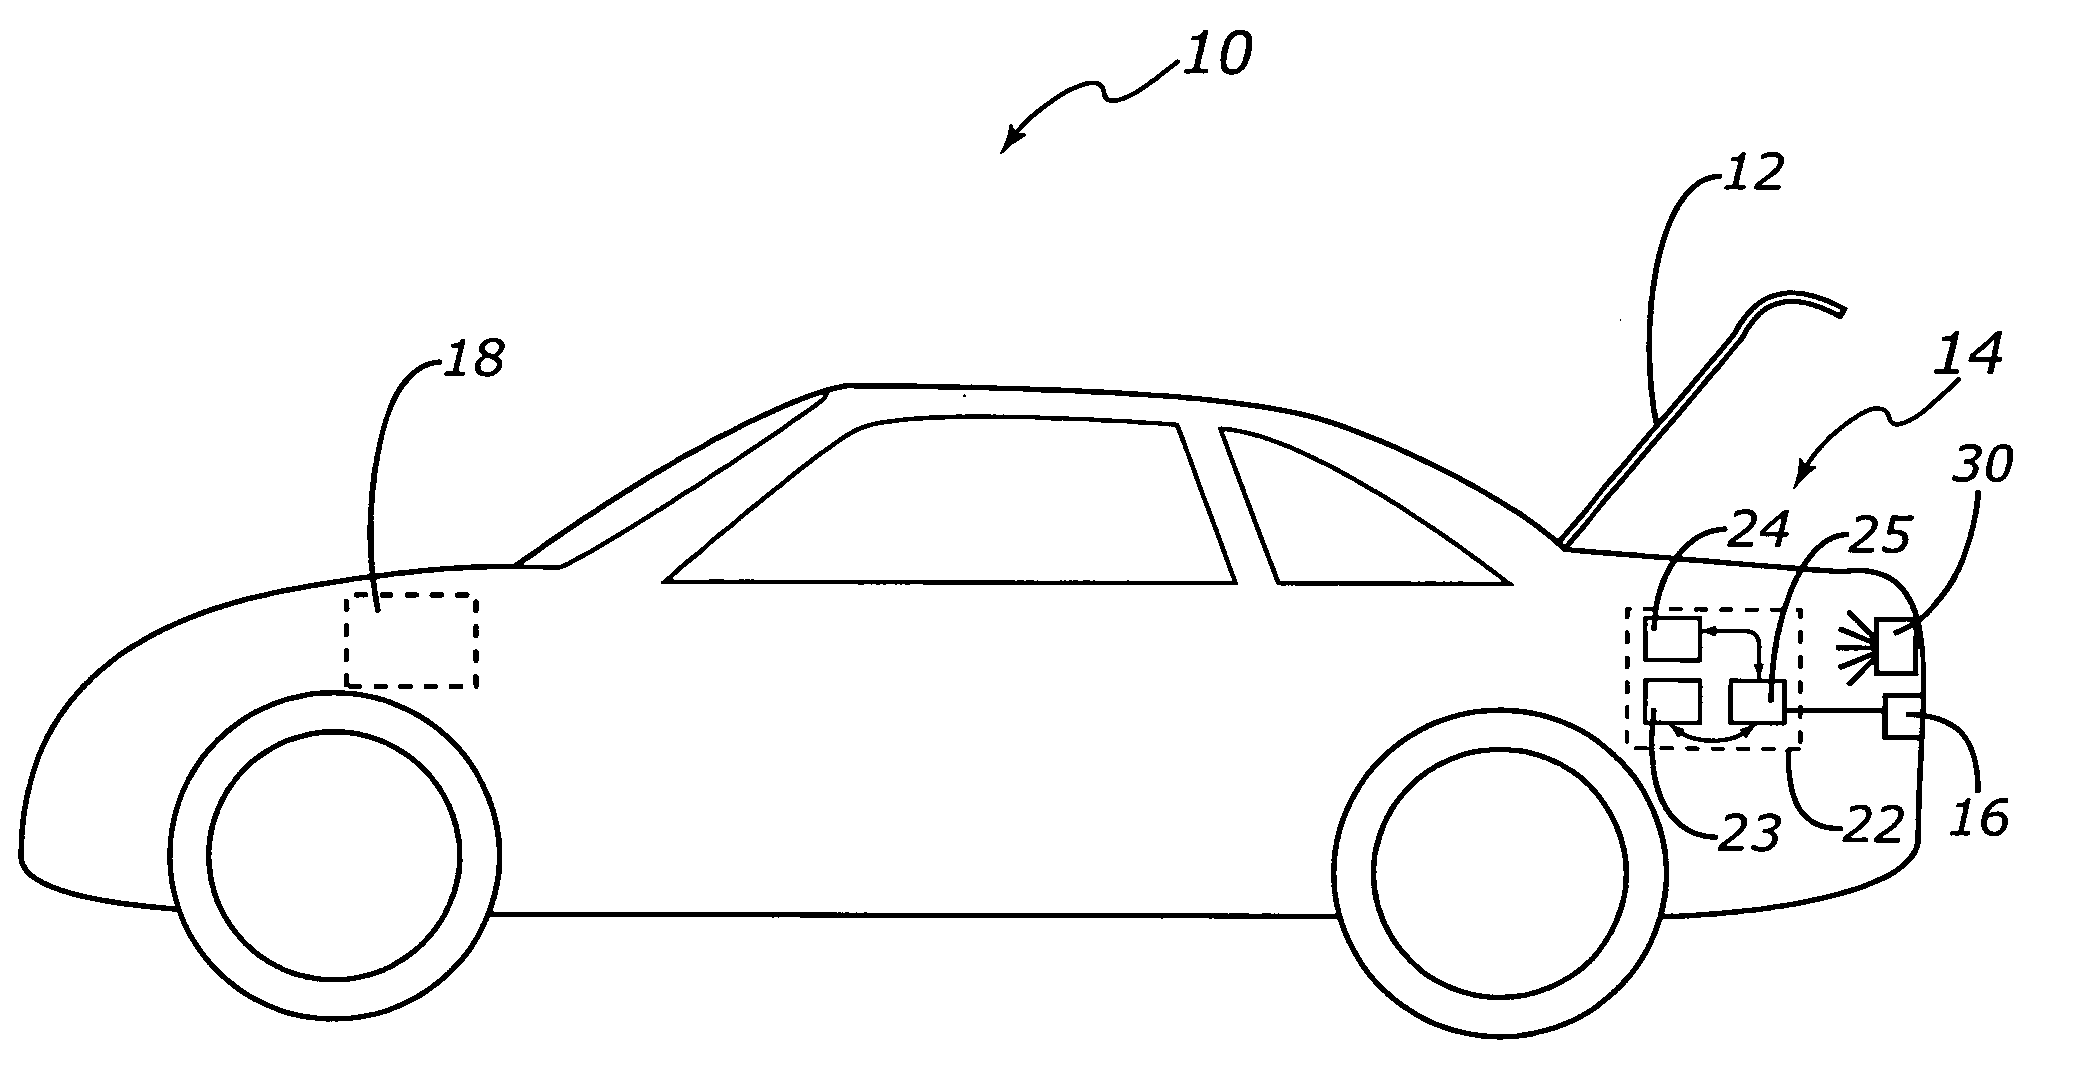 Automatic cargo compartment lighting reactivation system